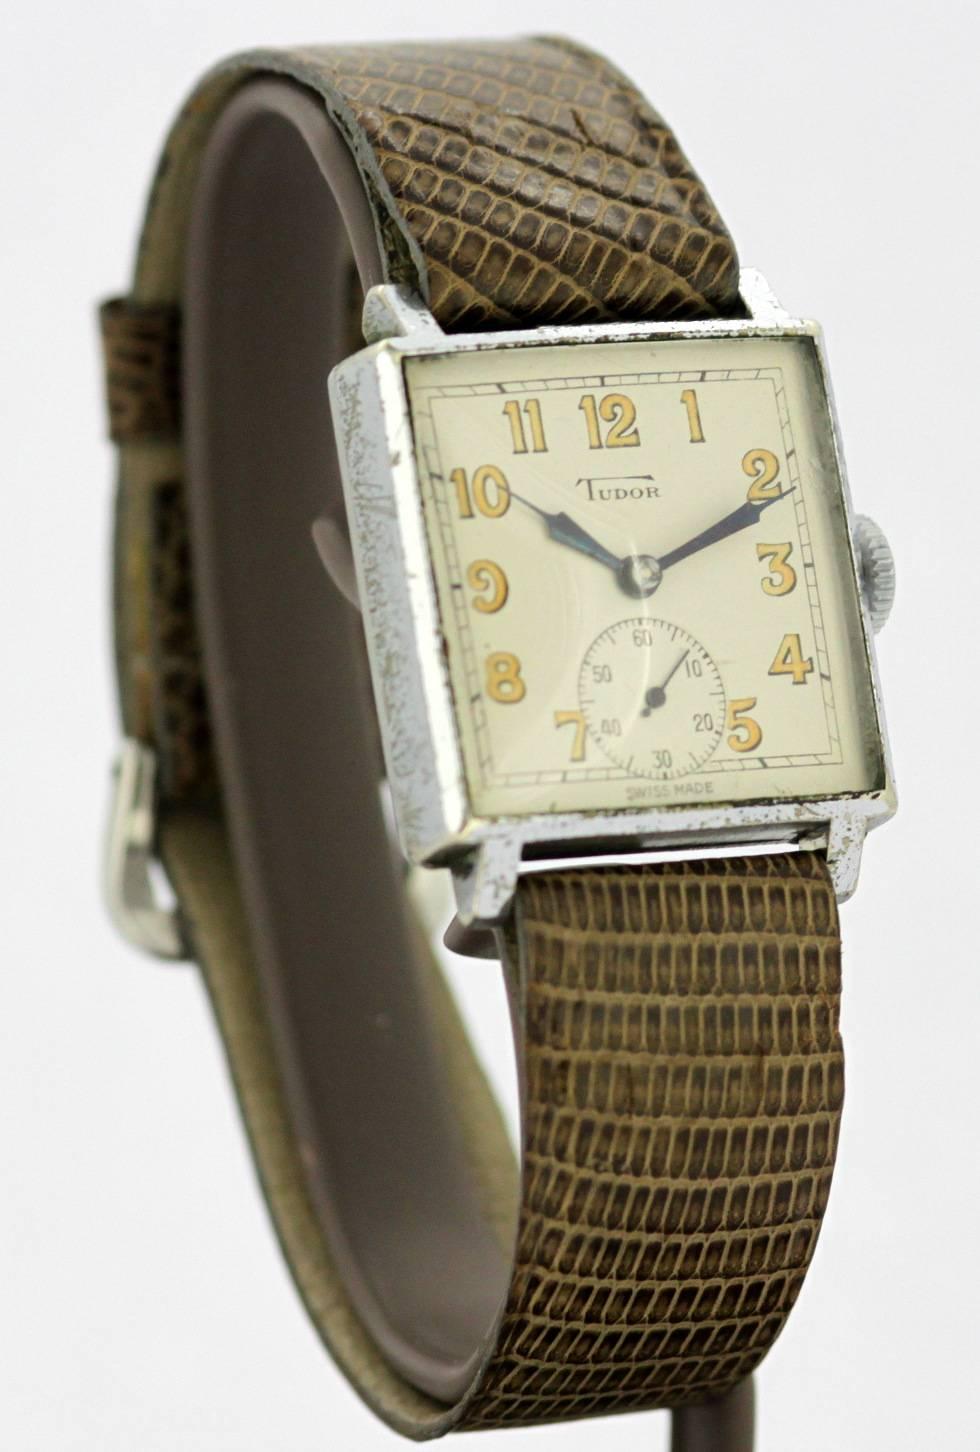 Tudor - men's manual winding wristwatch, c.1940's

Gender:	Mens Vintage
Case size(Including Crown): 33 x 28 mm
Movement: Manual Winding
Watchband Material: leather
Case material : Stainless Steel
Case color : Steel
Display Type:	Analogue	
Age:	